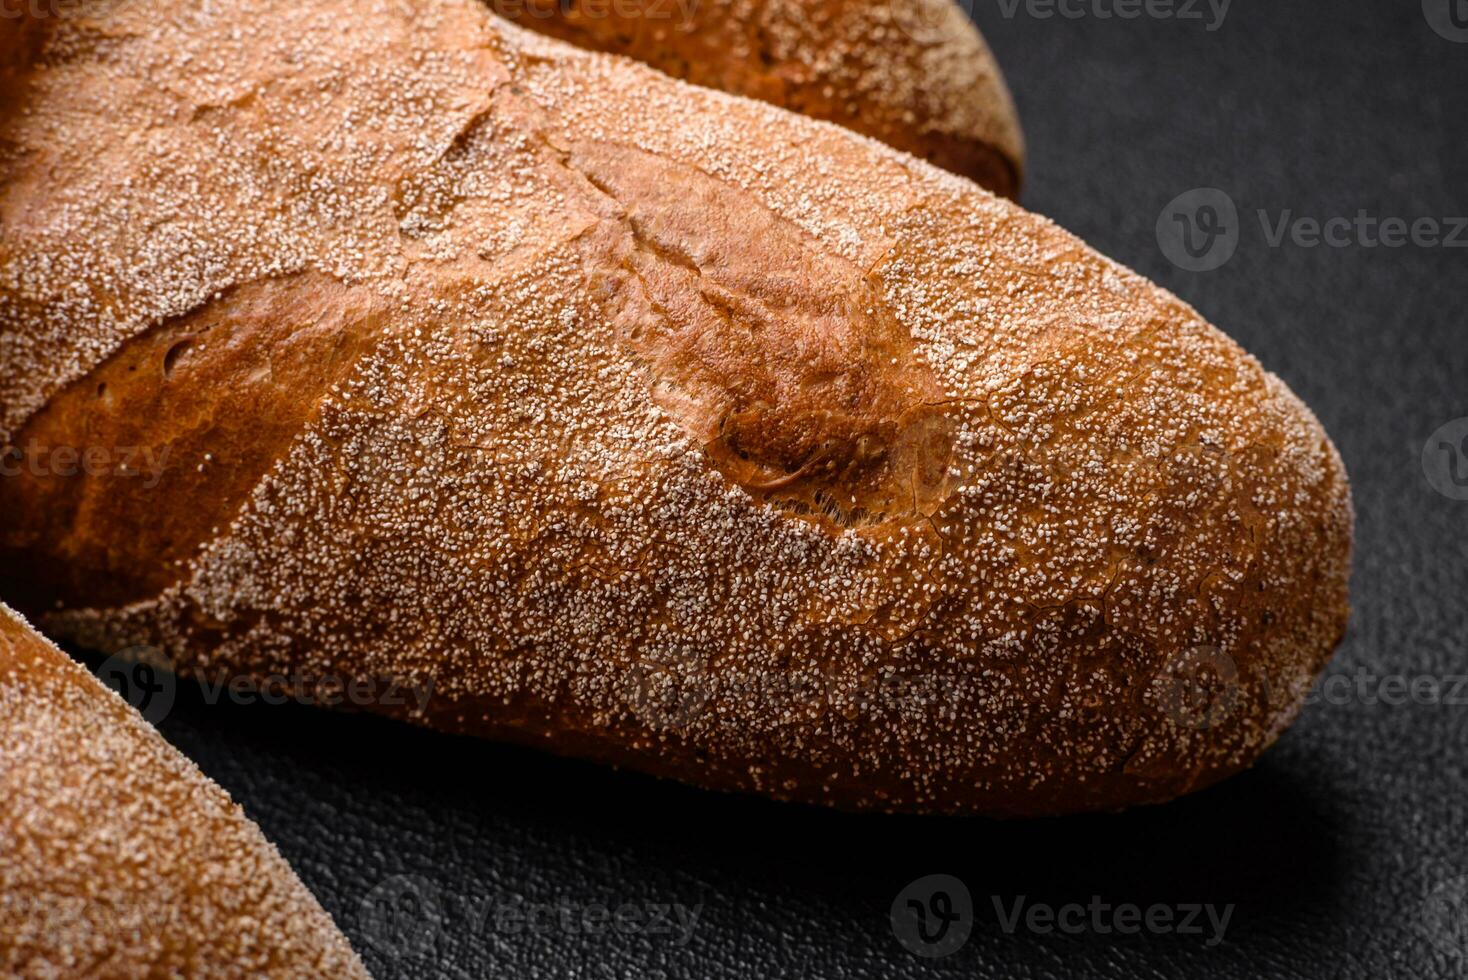 French baguette bread on a dark textured concrete background photo